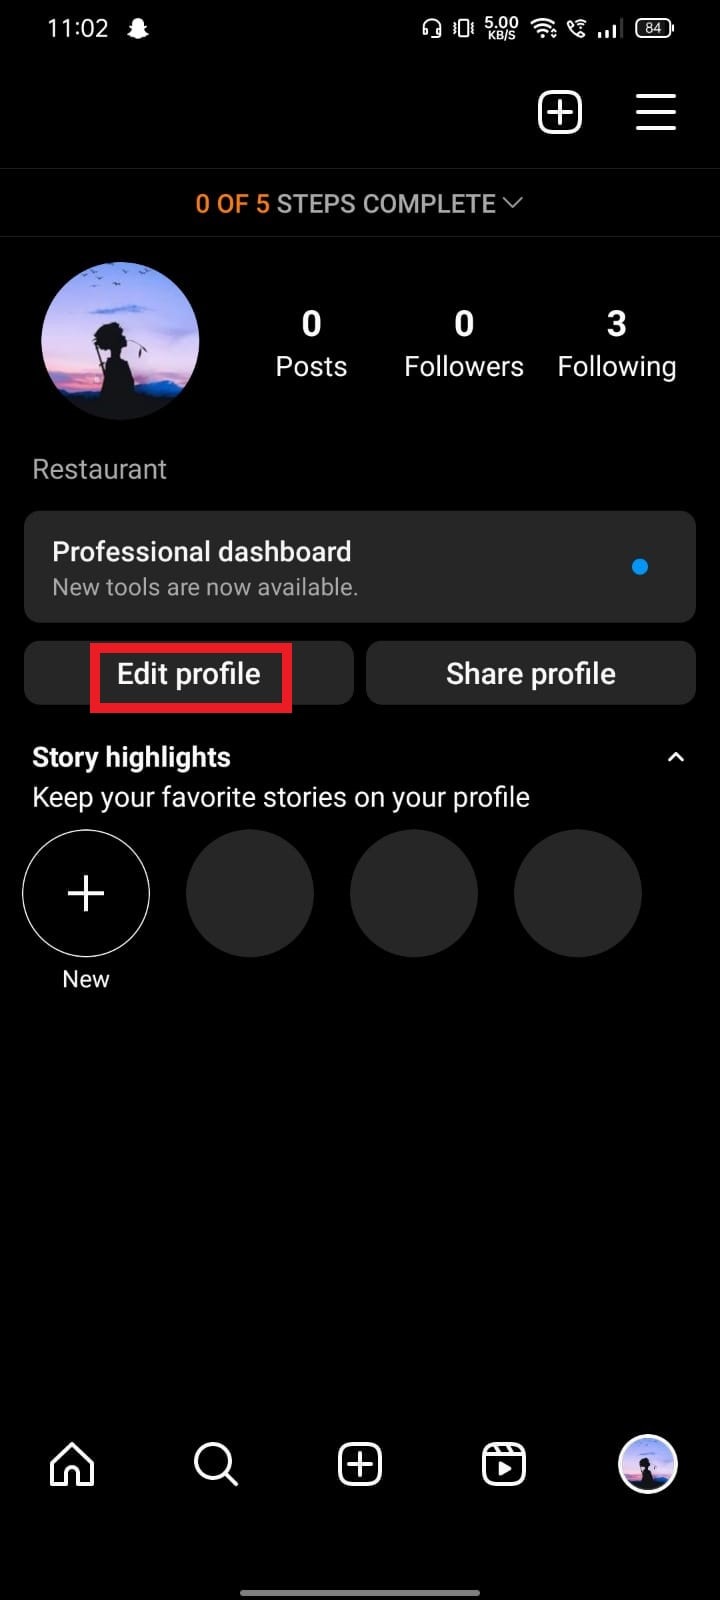 After coming to the Profile section, tap on the Edit Profile button.